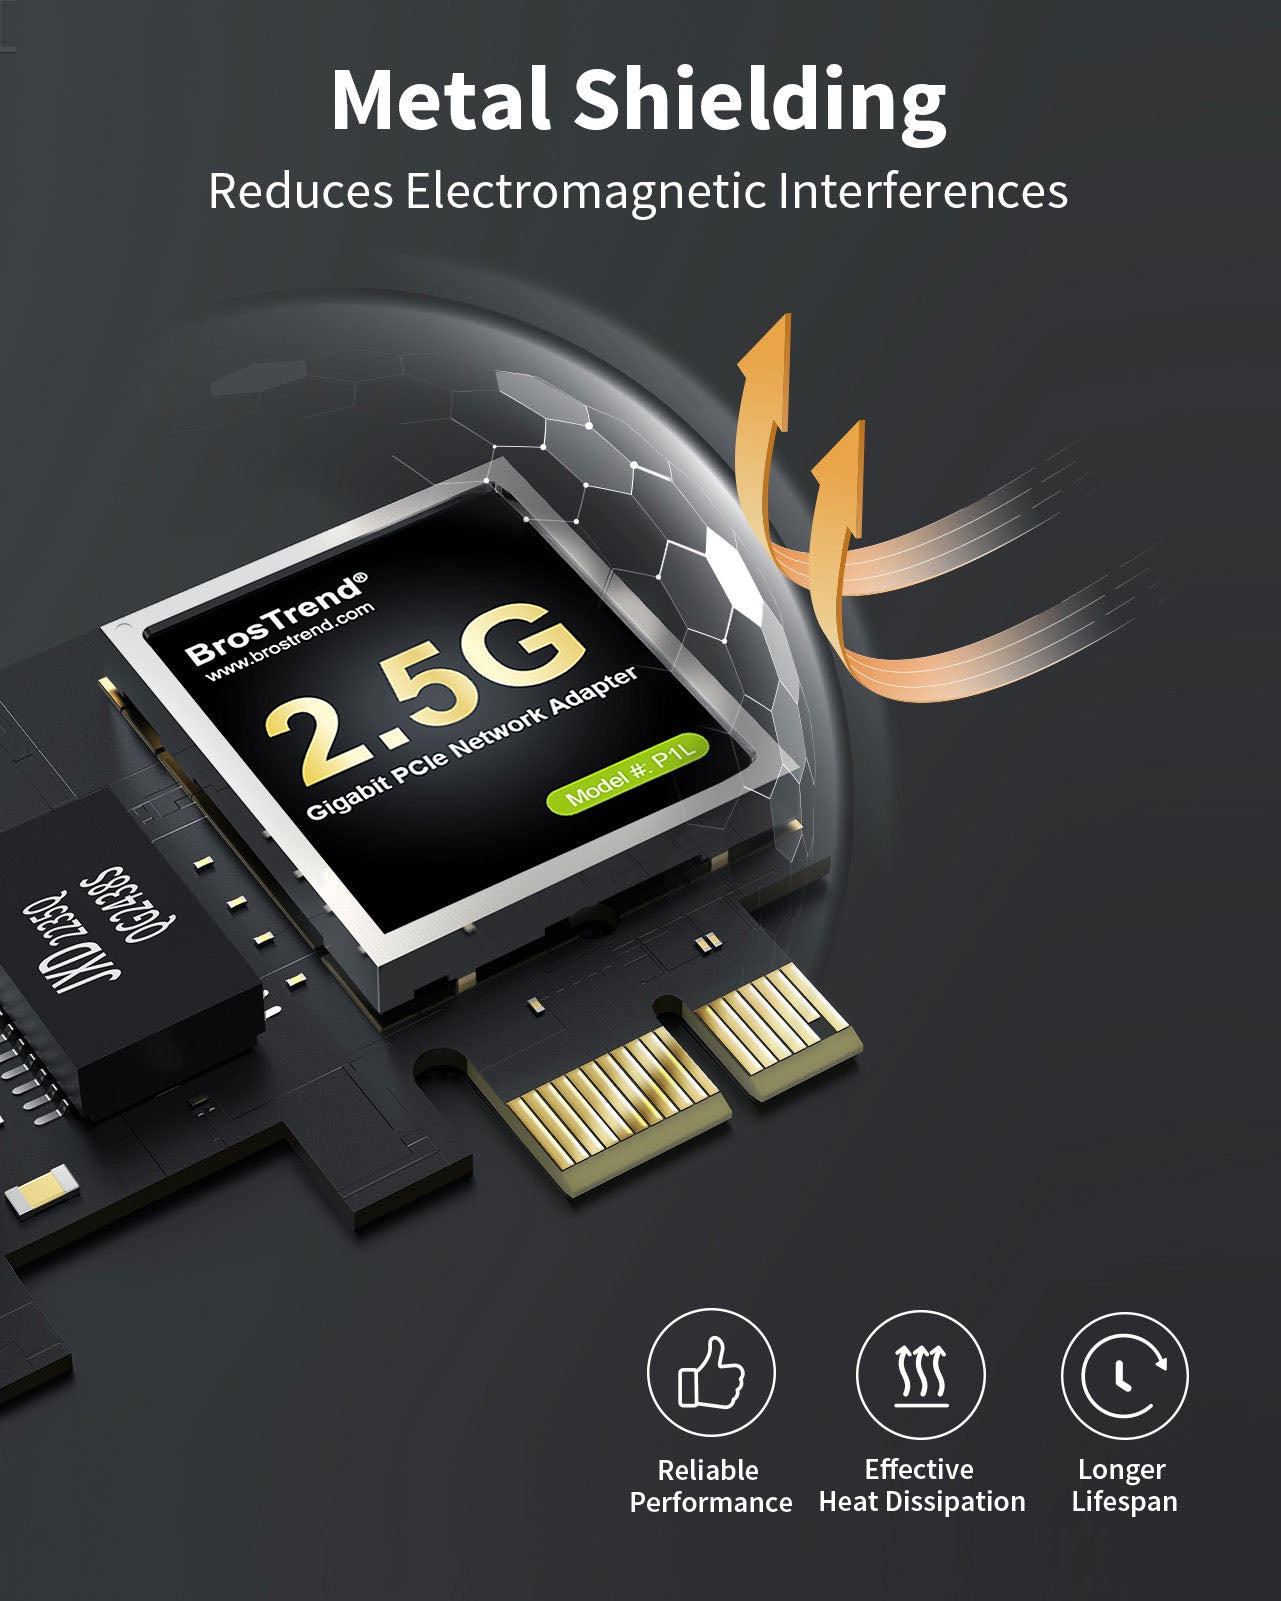 2.5GB PCIe Network Card with Metal Shielding Minimizes Electromagnetic Interference for a Solid Connection Supports QoS and Wake on LAN